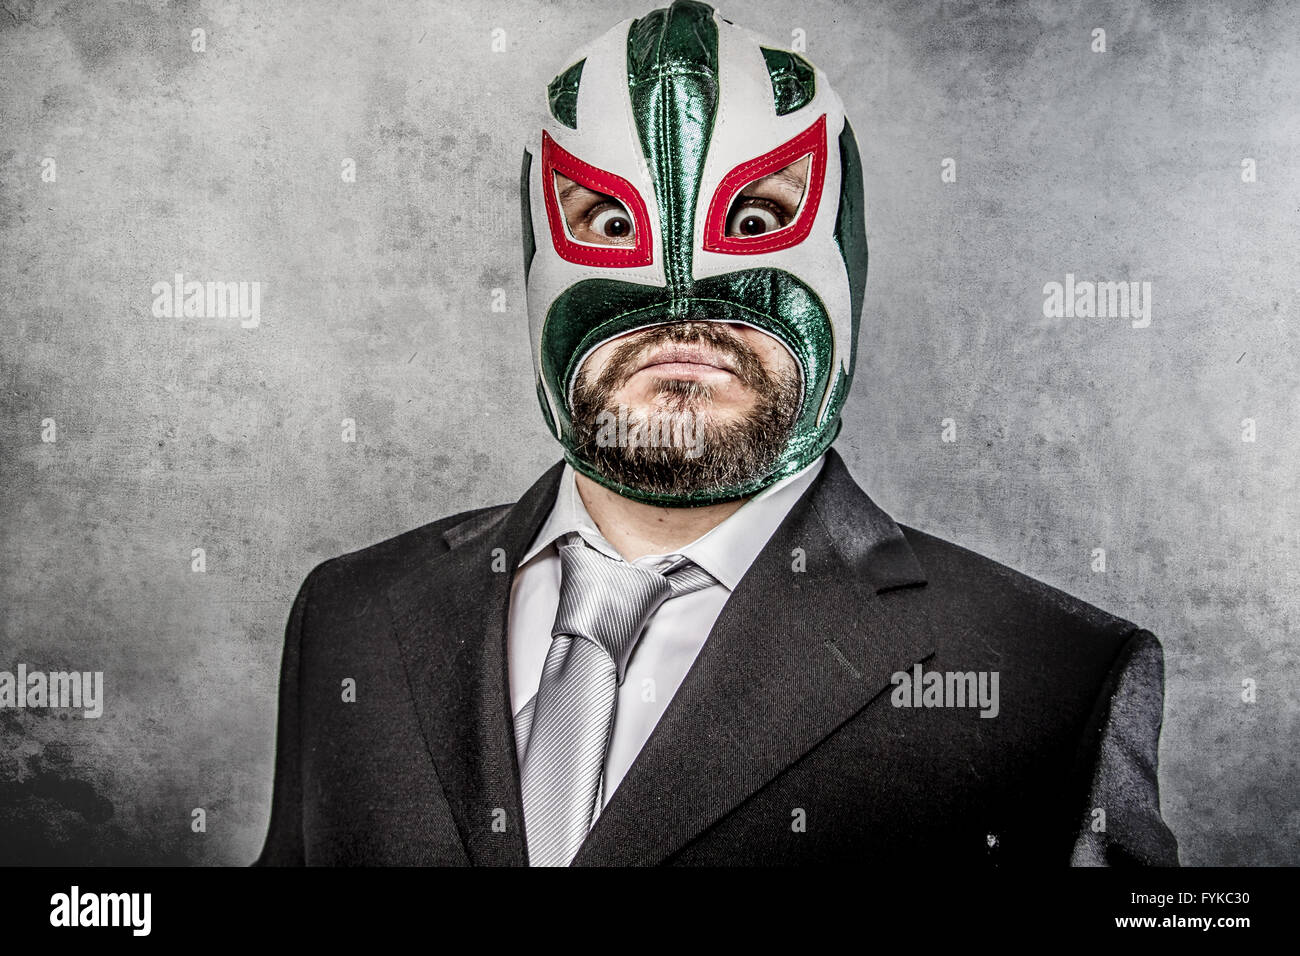 businessman angry with Mexican wrestler mask Stock Photo